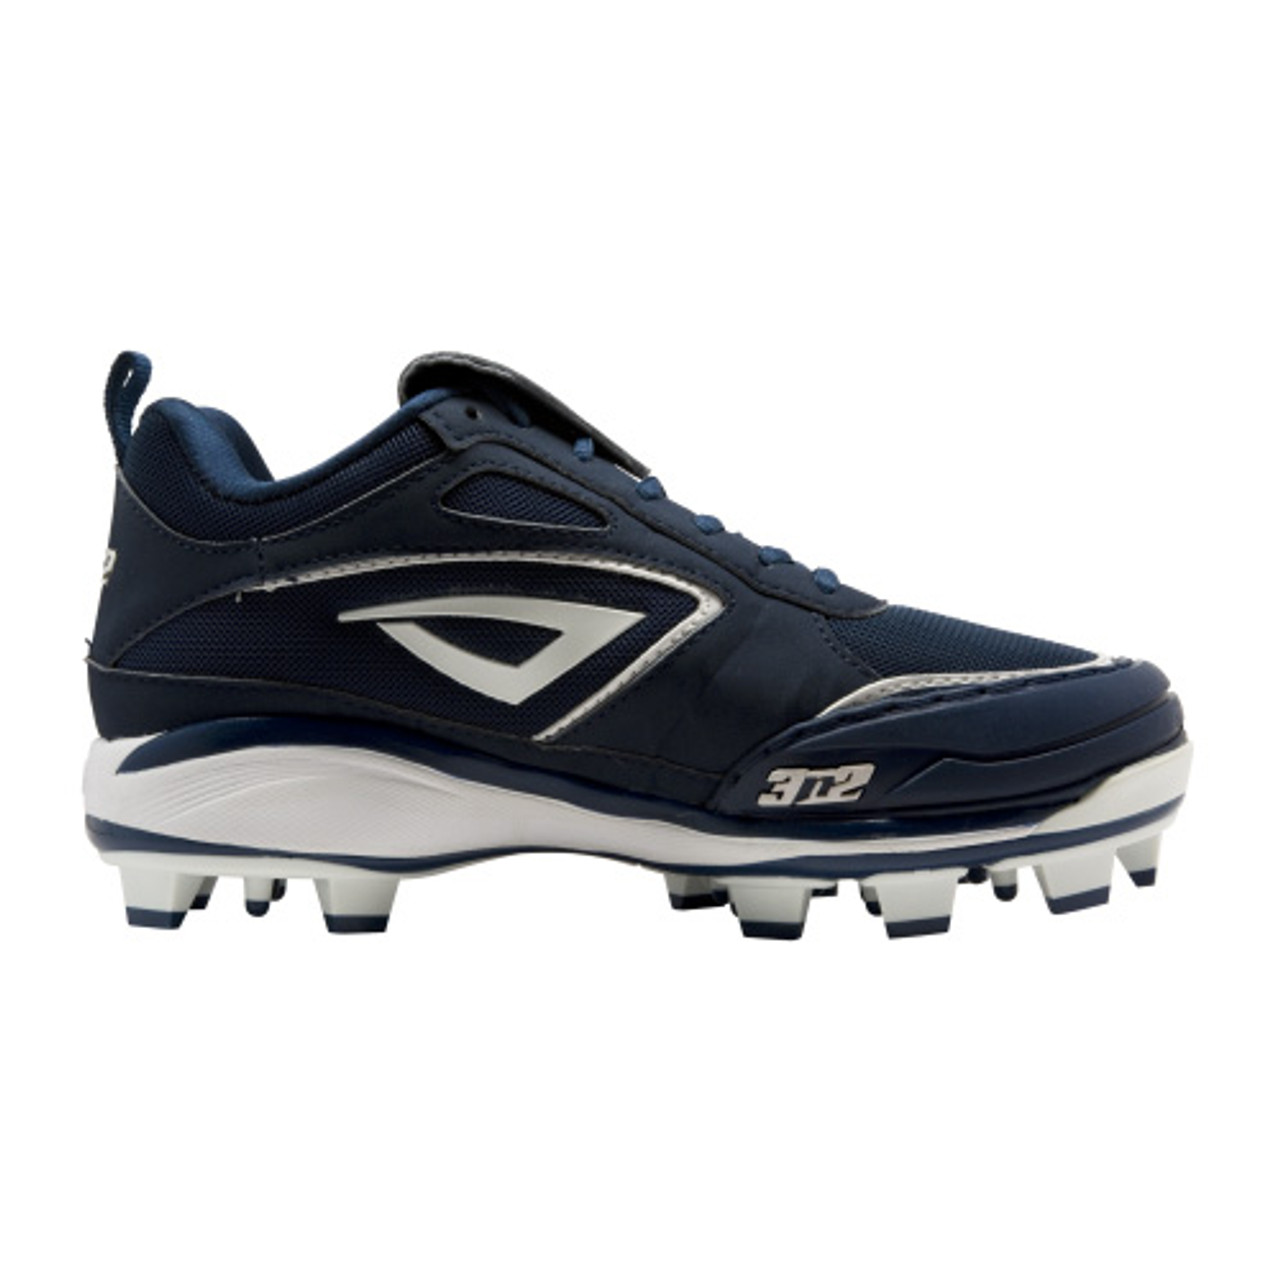 Rally TPU Fastpitch Softball Cleats With Pitching Toe By, 43% OFF